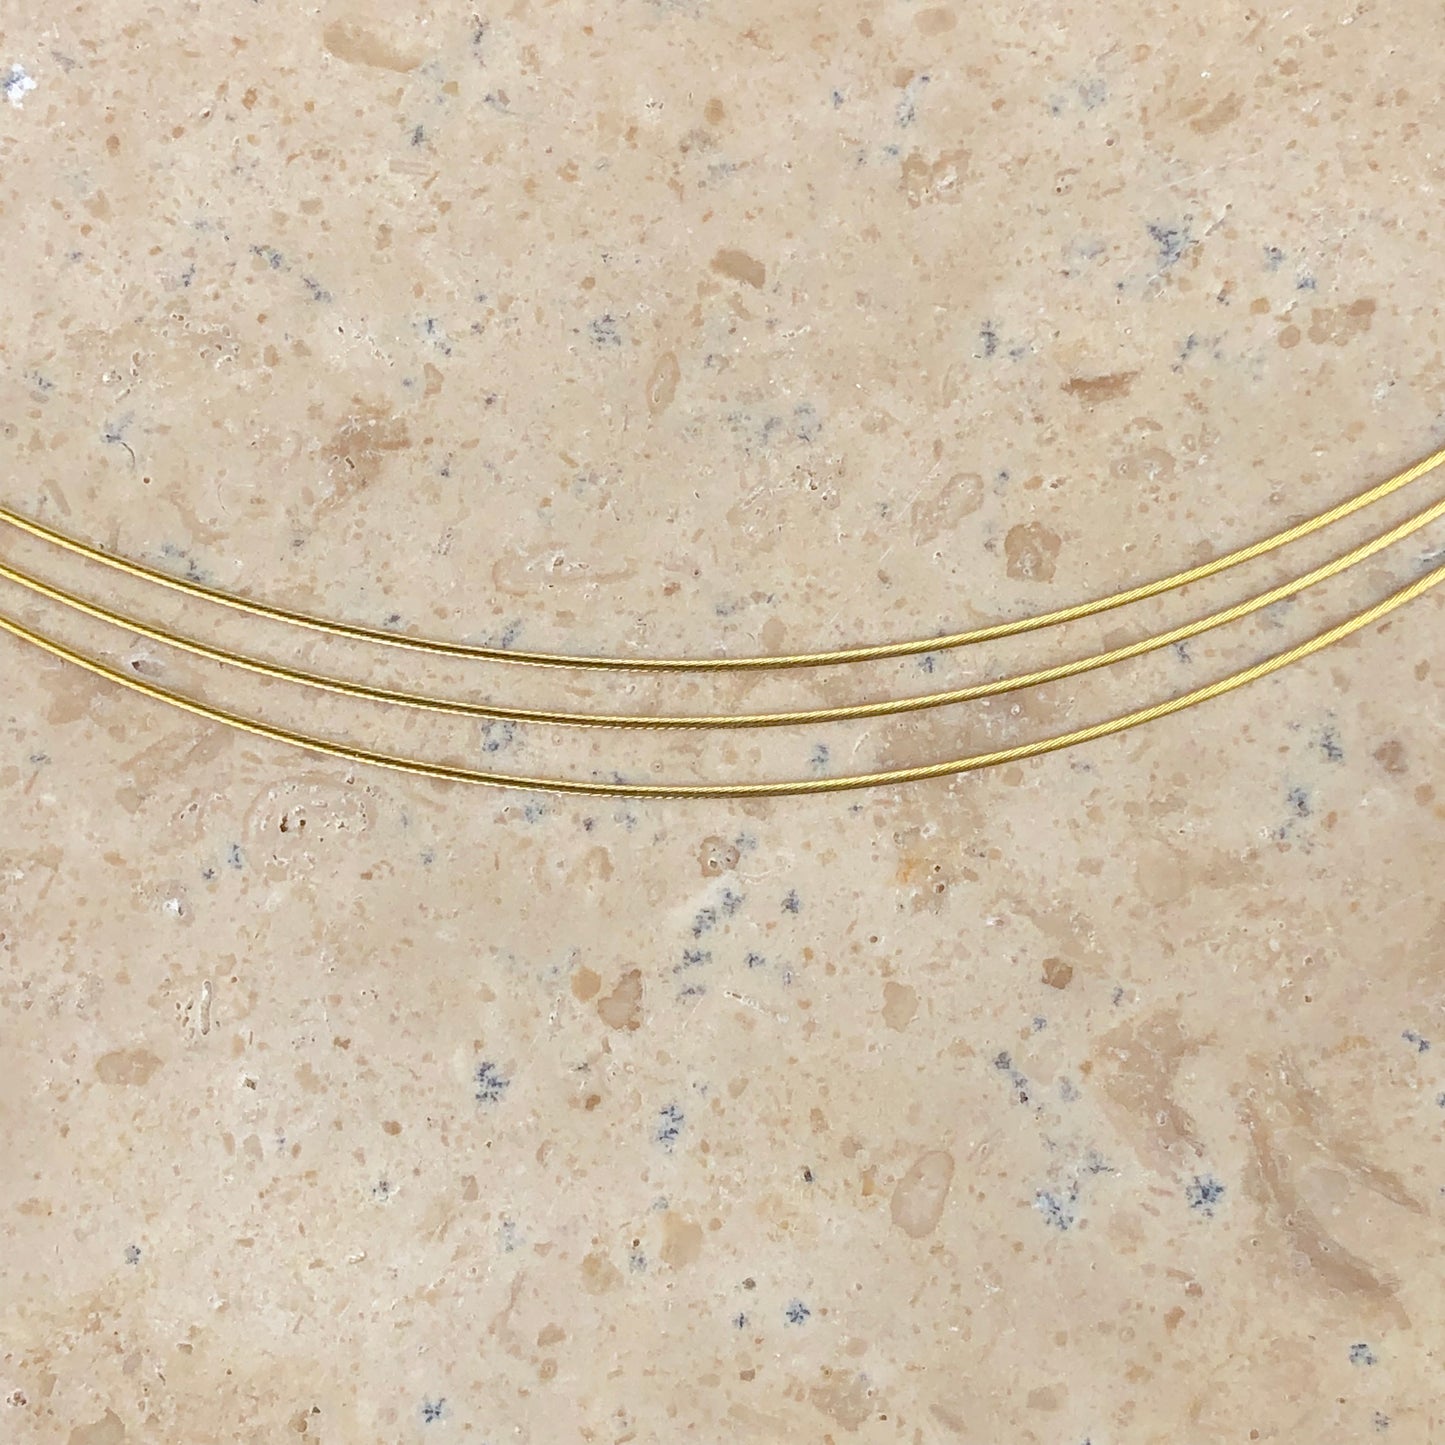 14KT Yellow Gold 3-Strand Cable Wire Collar Necklace, 14KT Yellow Gold 3-Strand Cable Wire Collar Necklace - Legacy Saint Jewelry